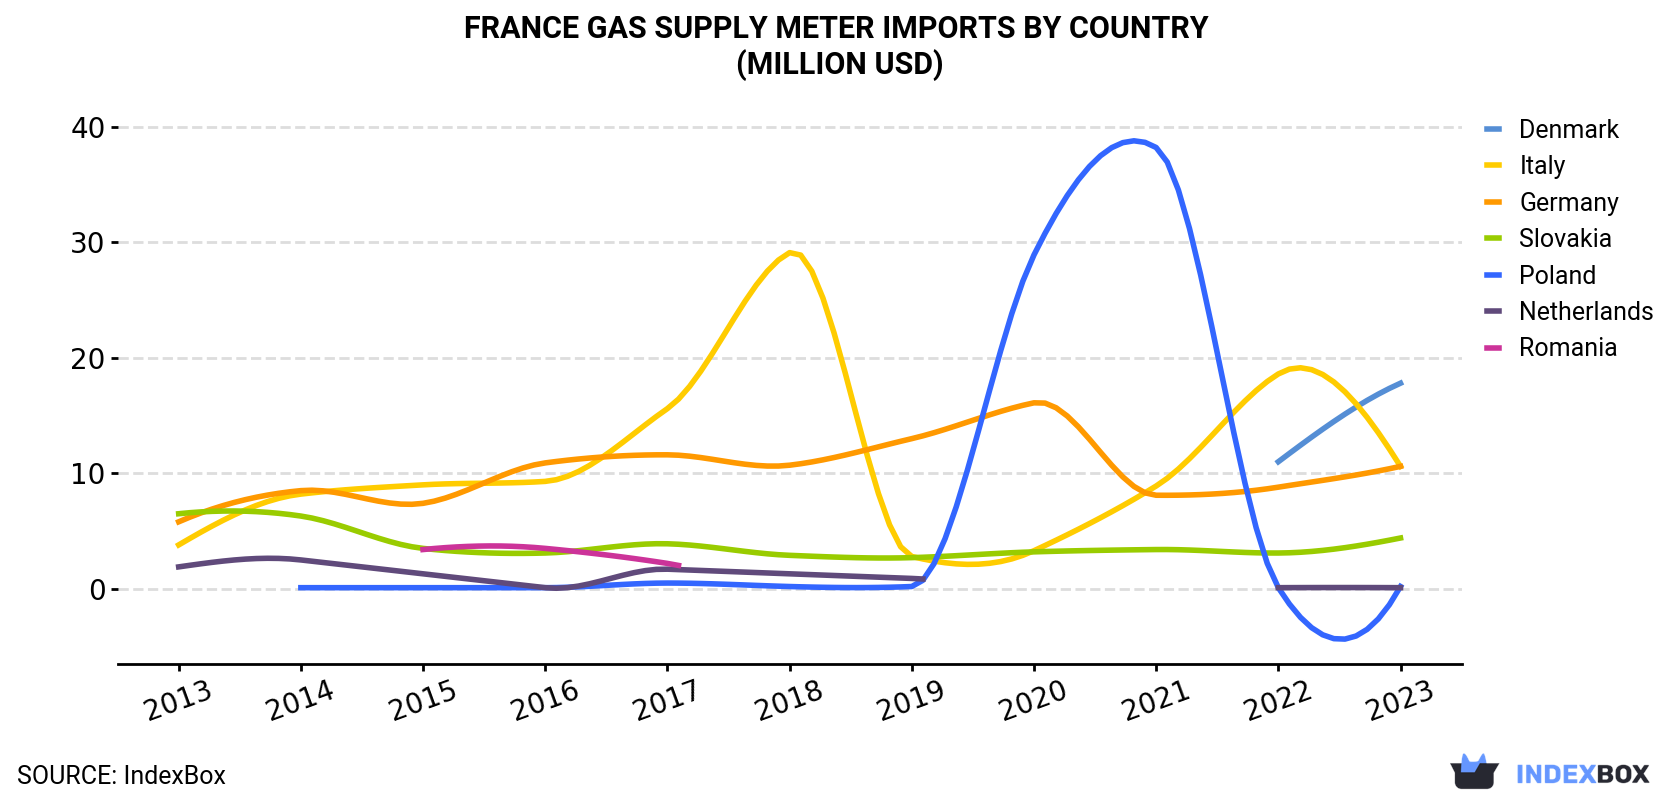 France Gas Supply Meter Imports By Country (Million USD)